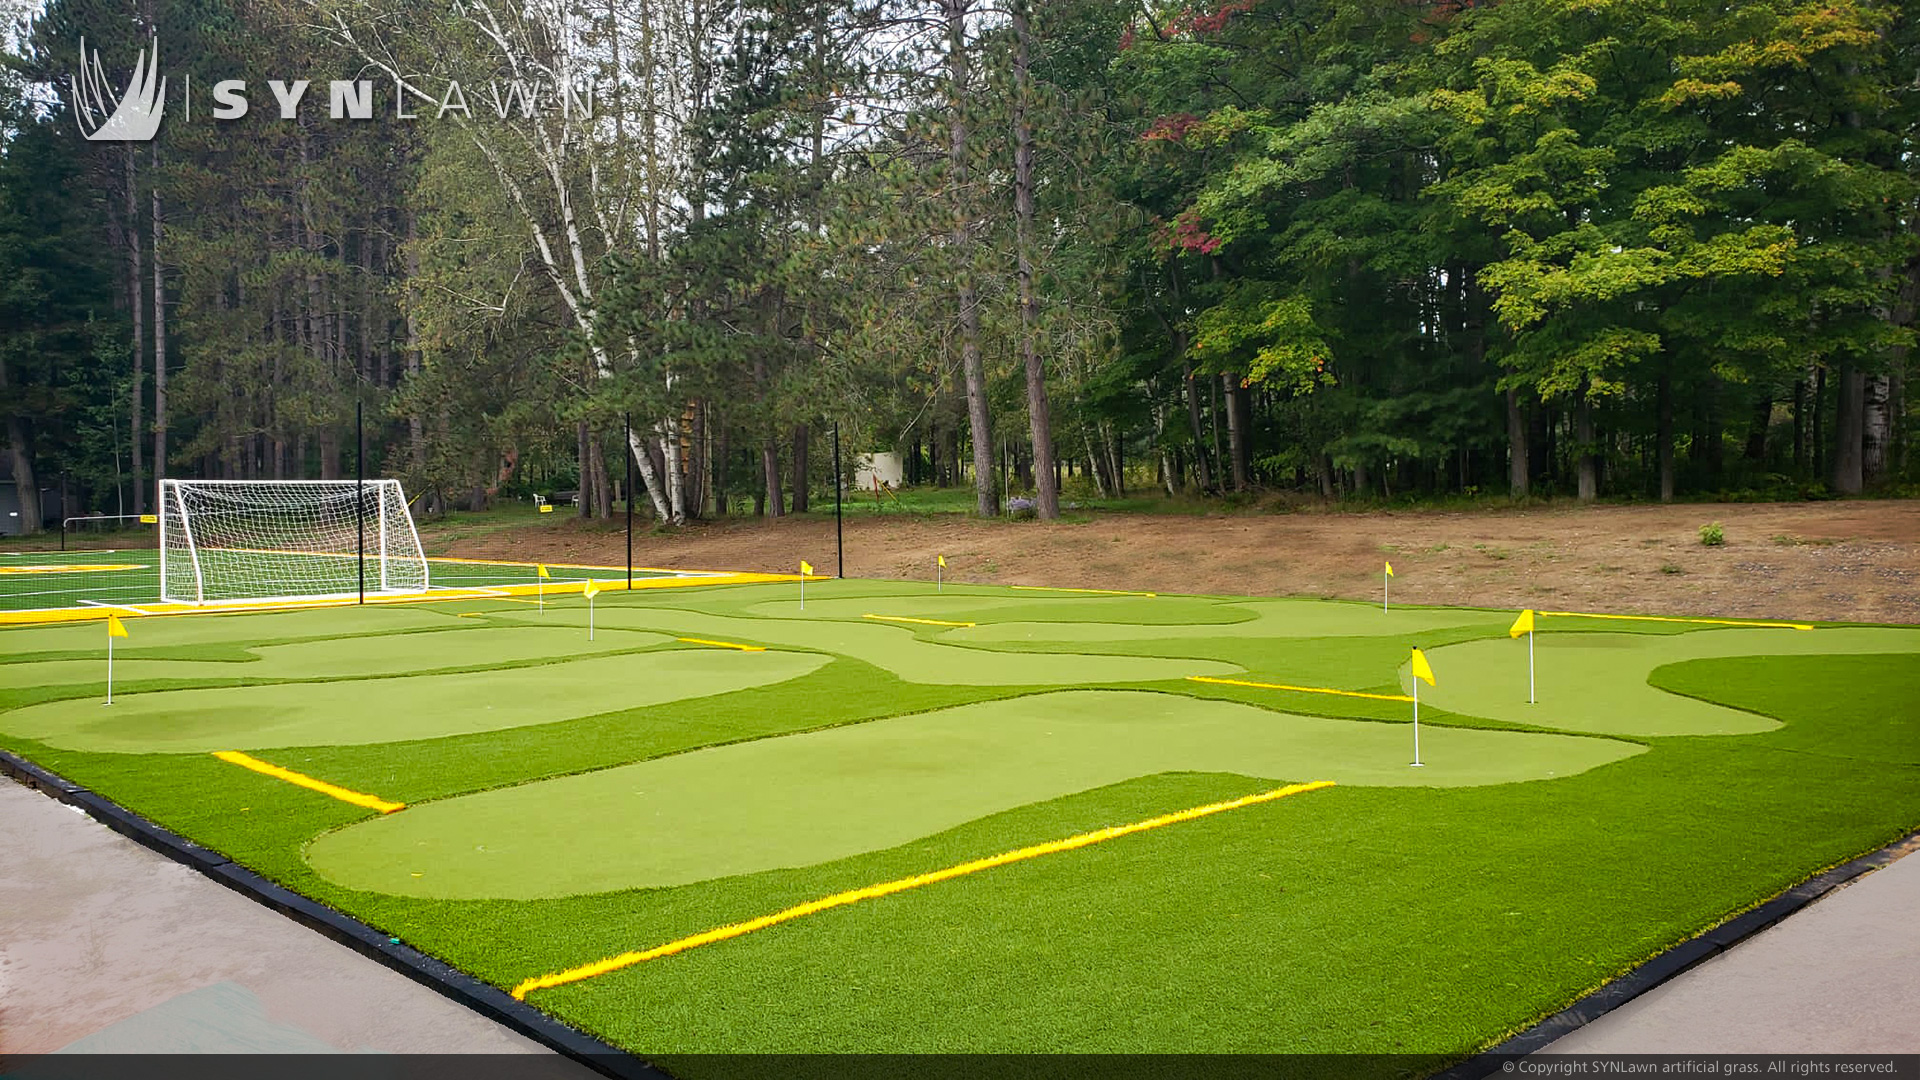 image of SYNLawn Toronto installs artificial grass Soccer field and 8 hold Mini Golf Course at Canadian National Institute for the Blind